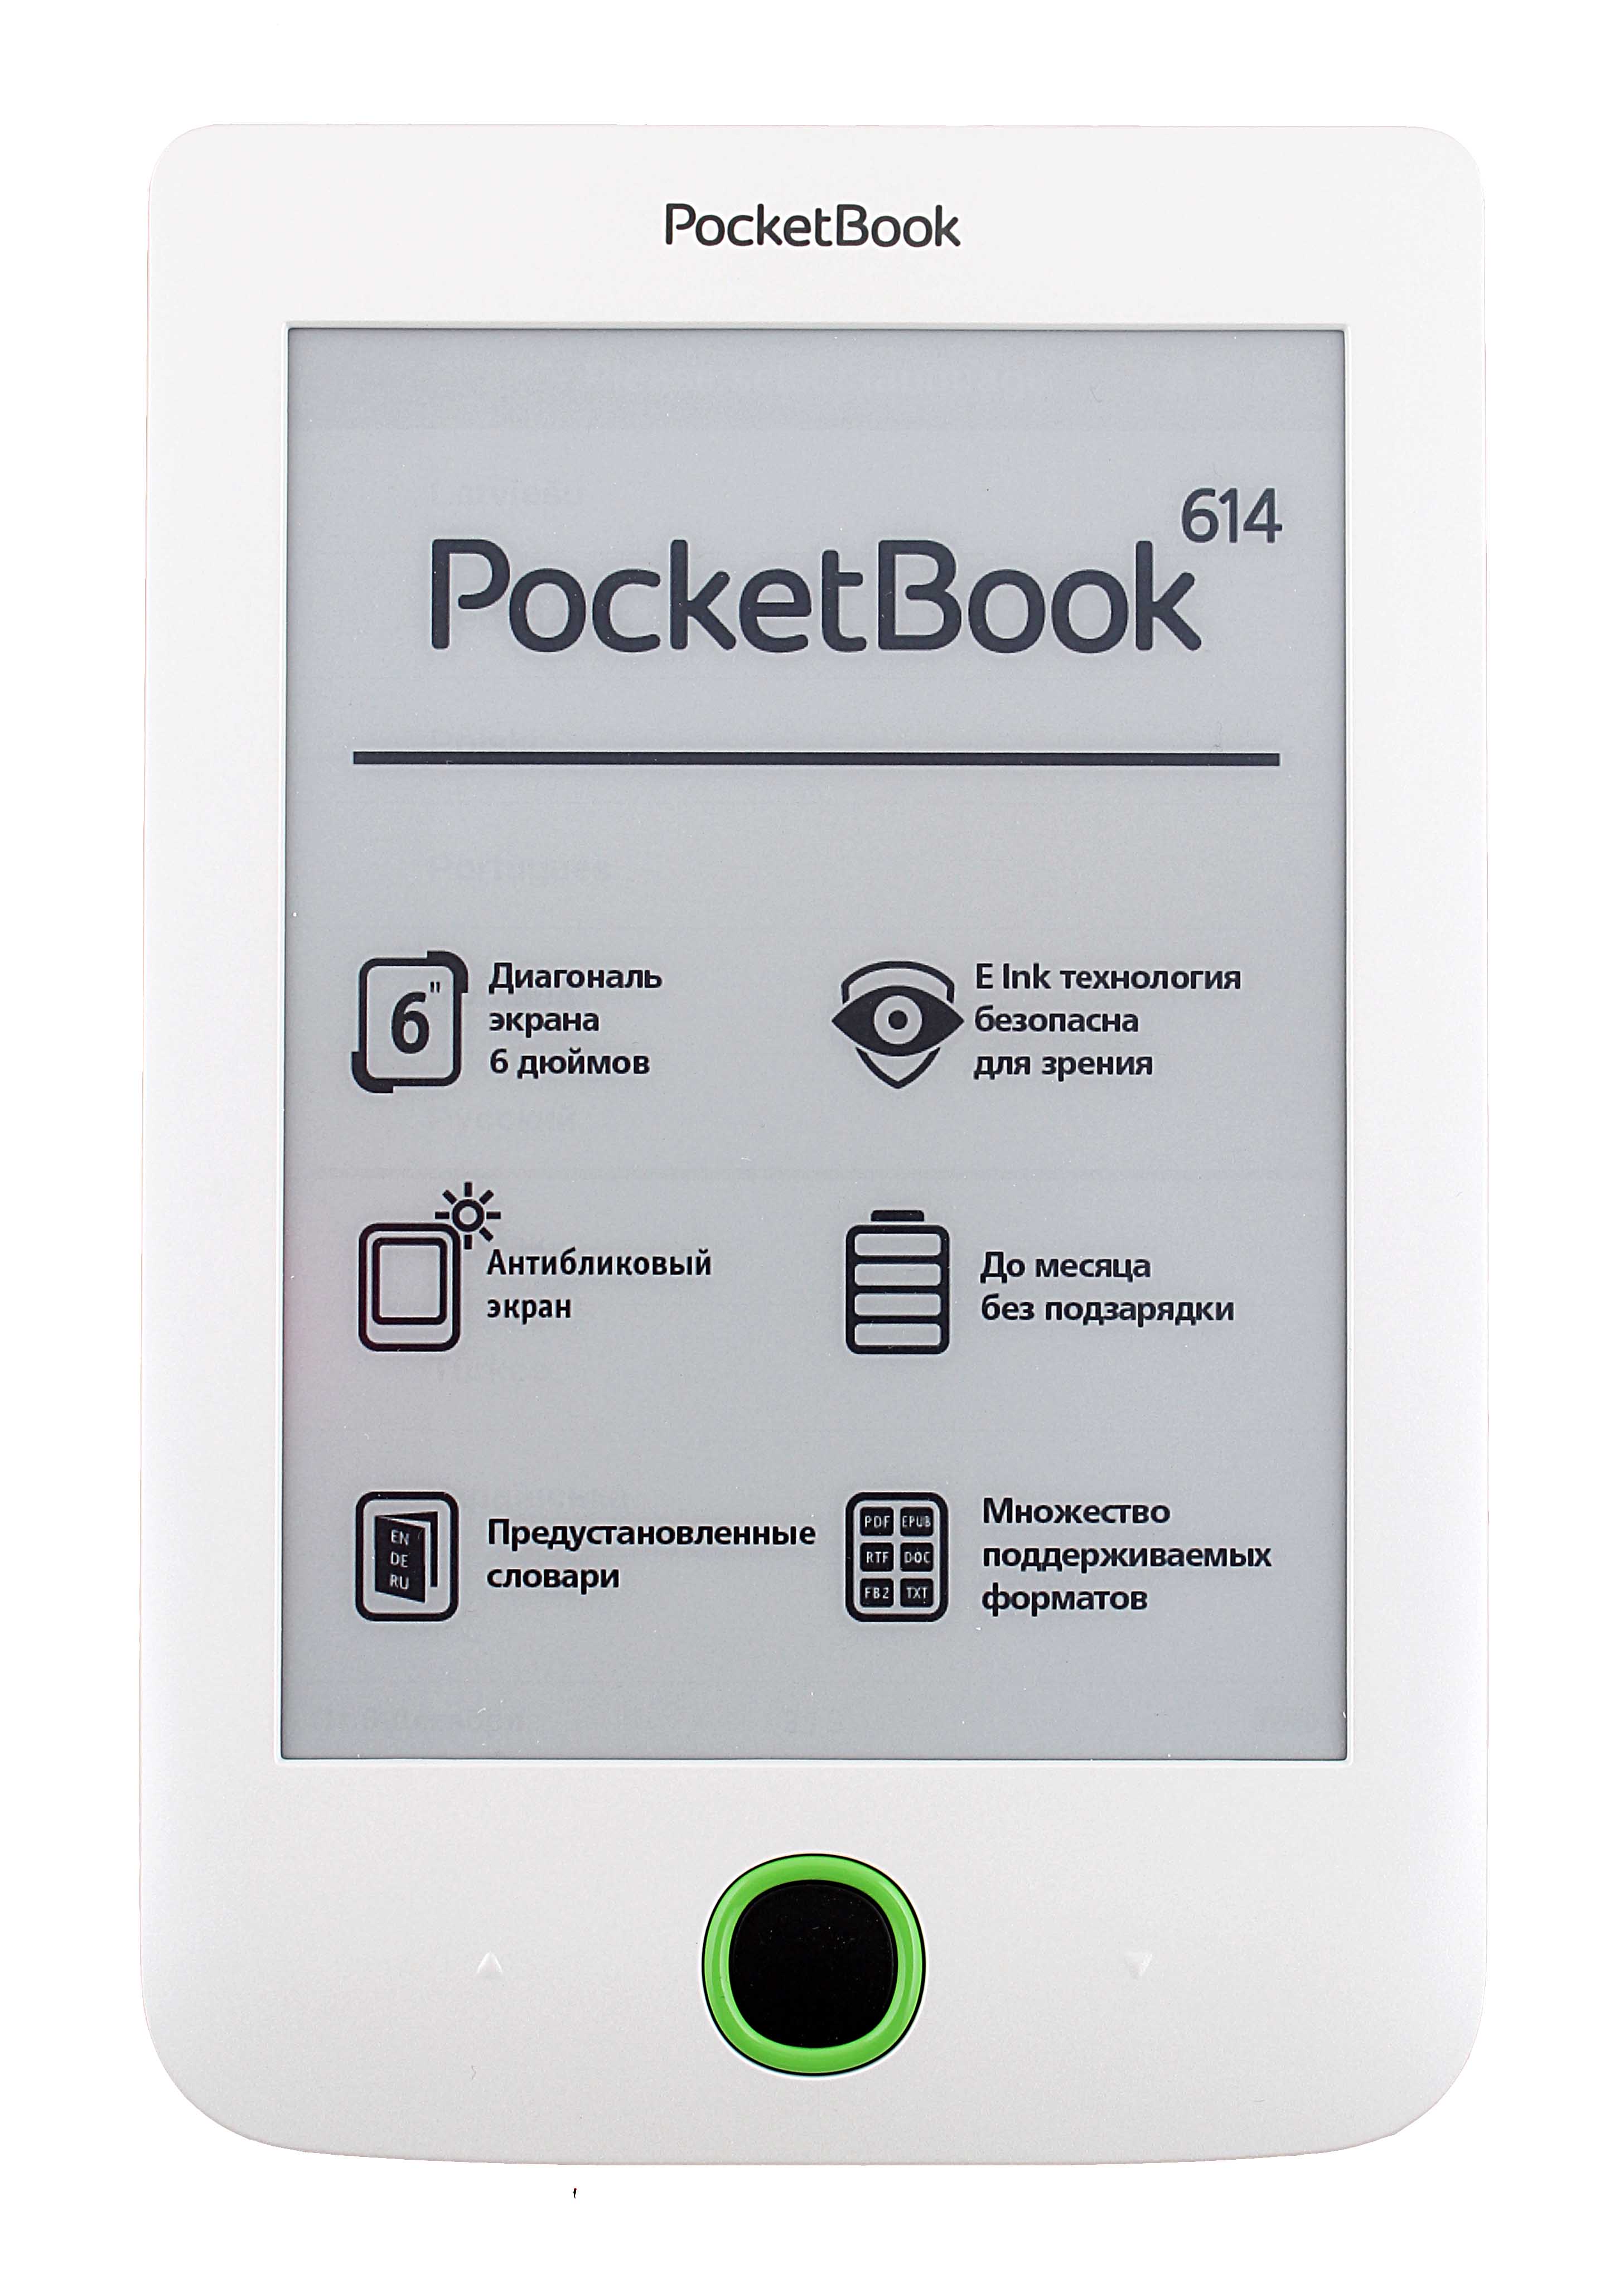   Pocketbook - Pocketbook - Pocketbook :   (E-Ink);  : 6 ;   E-Ink: pearl;   : <br>